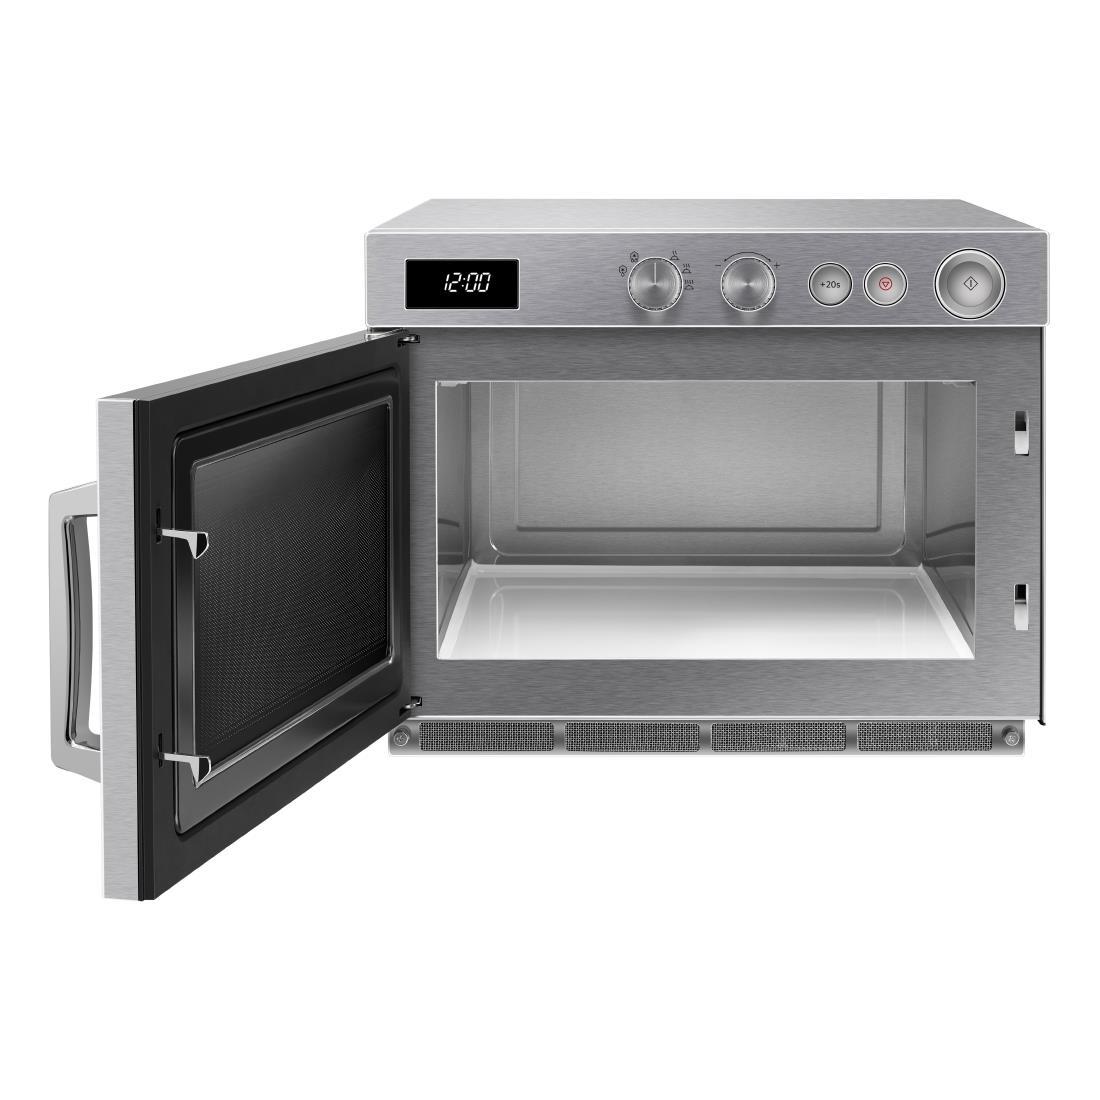 Samsung Commercial Microwave Manual 26Ltr 1500W - FS317  - 3